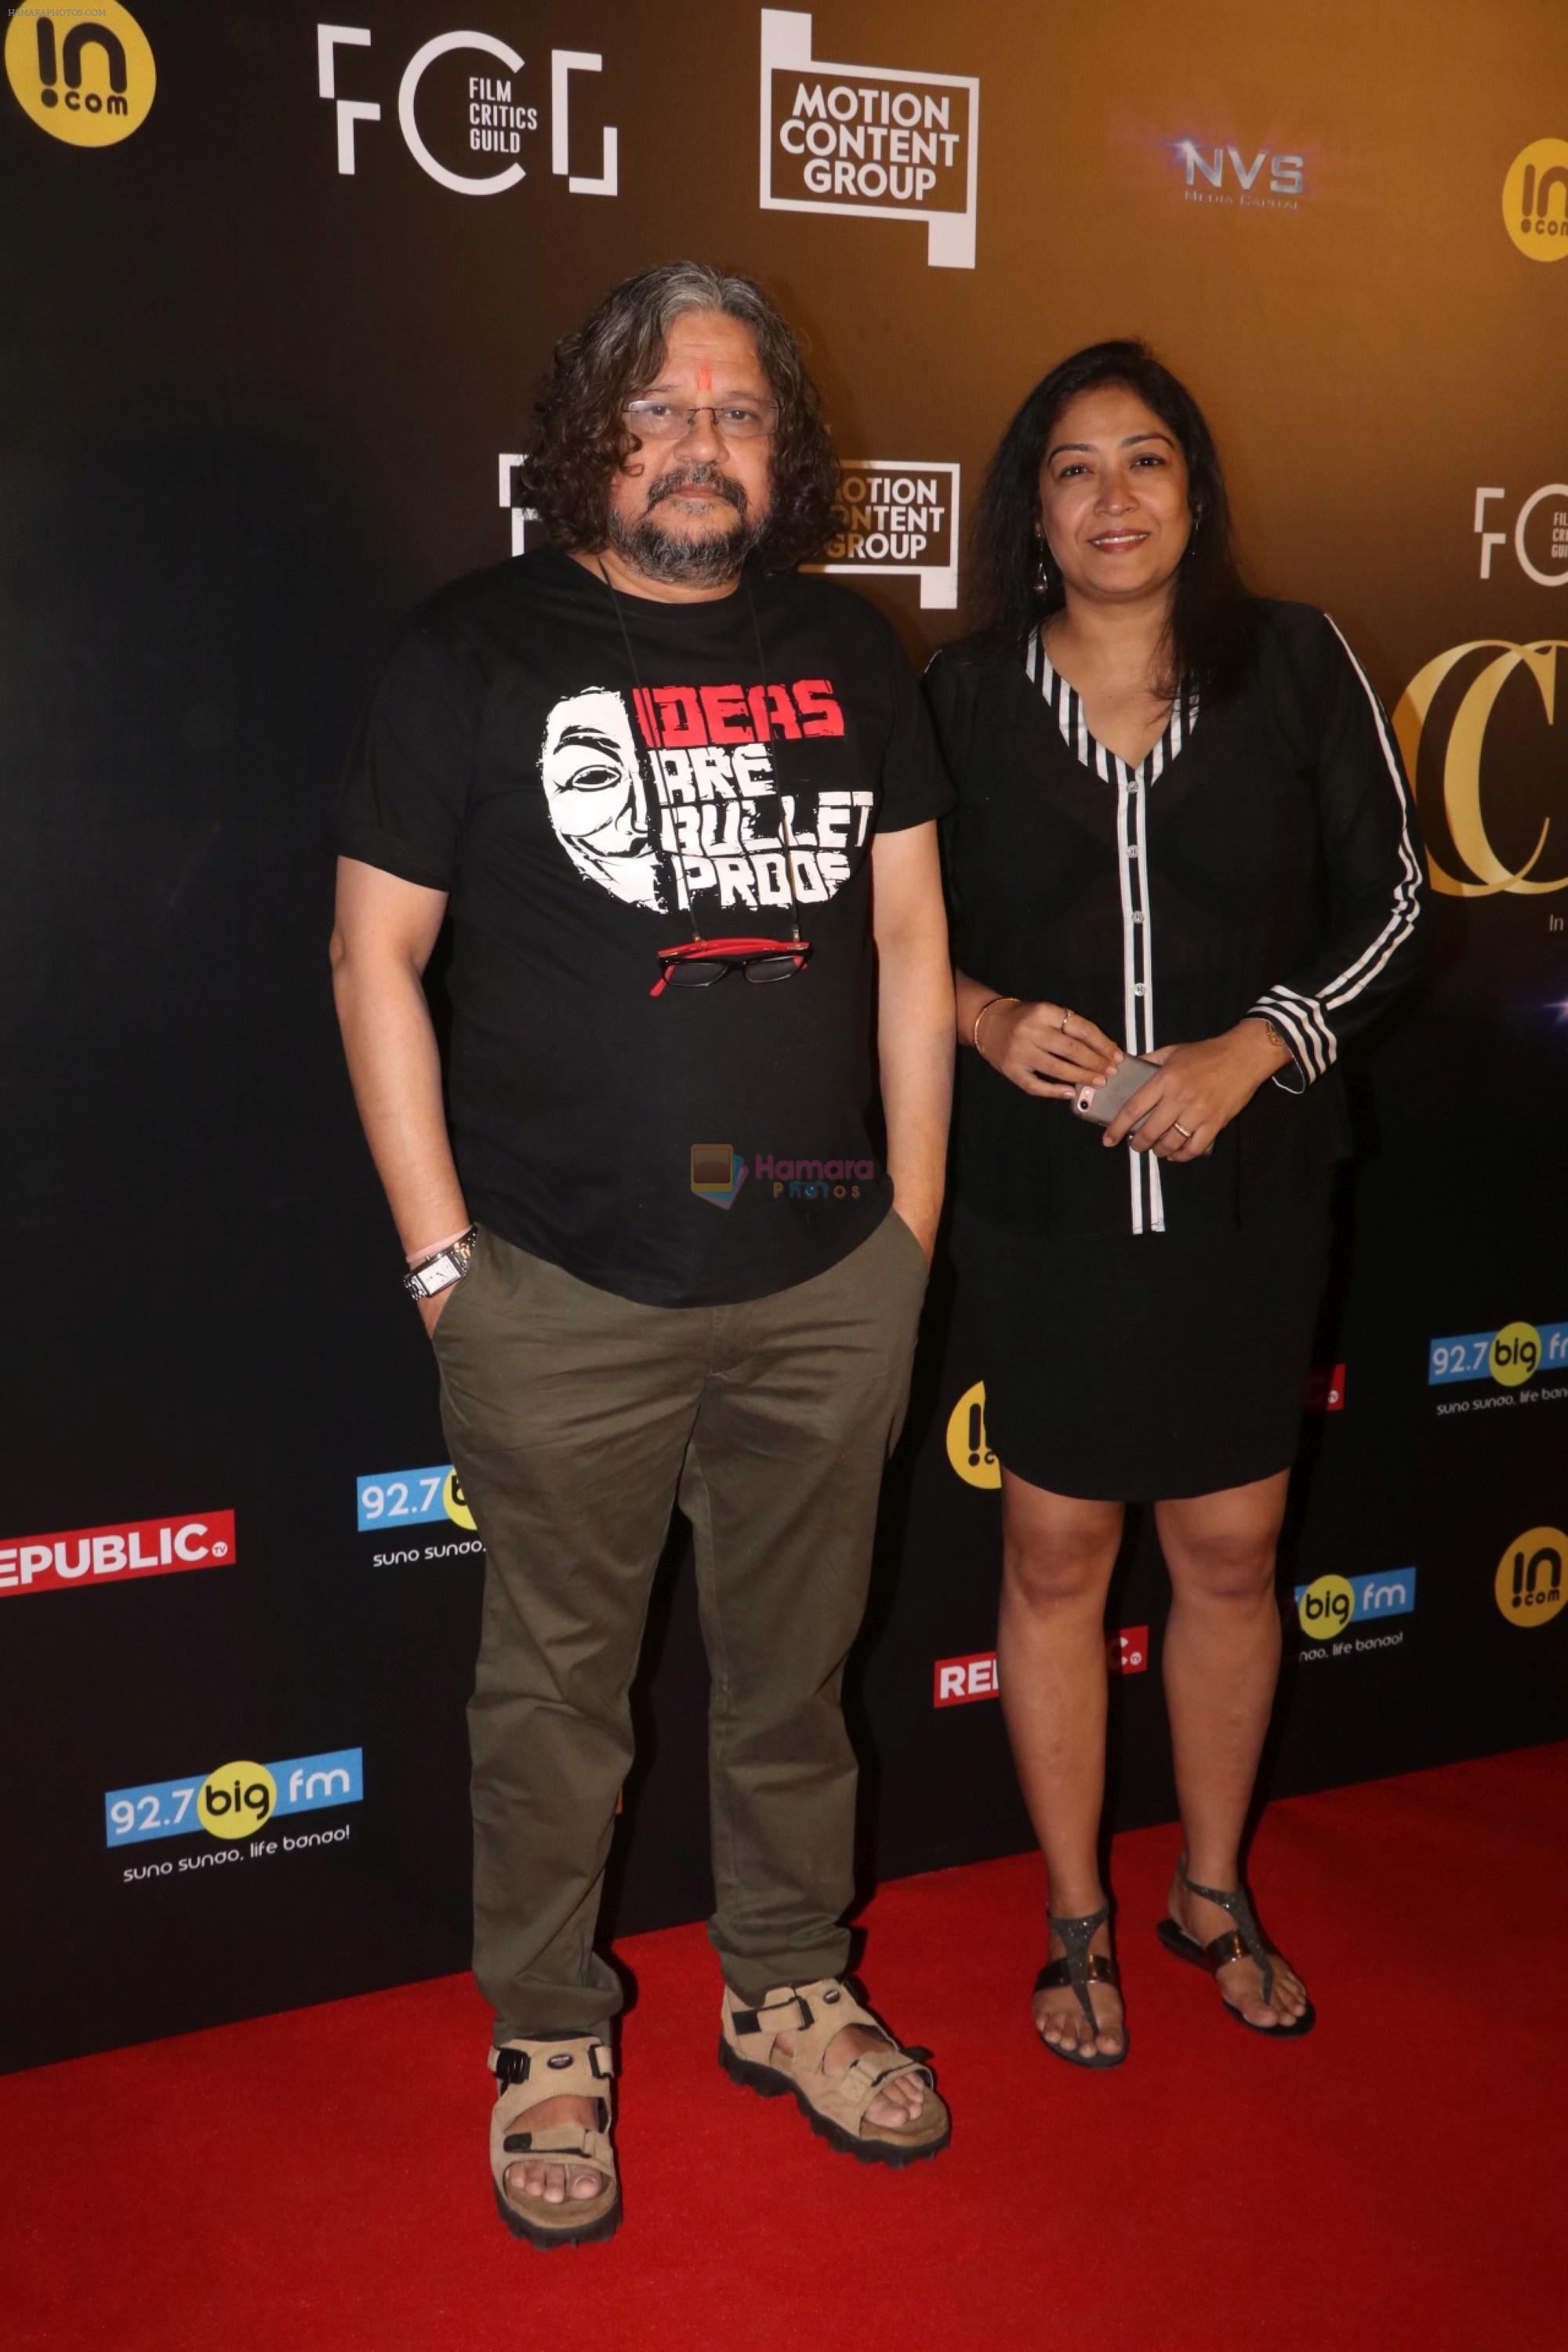 Amole Gupte at the Red carpet of critics choice short film awards on 15th Dec 2018